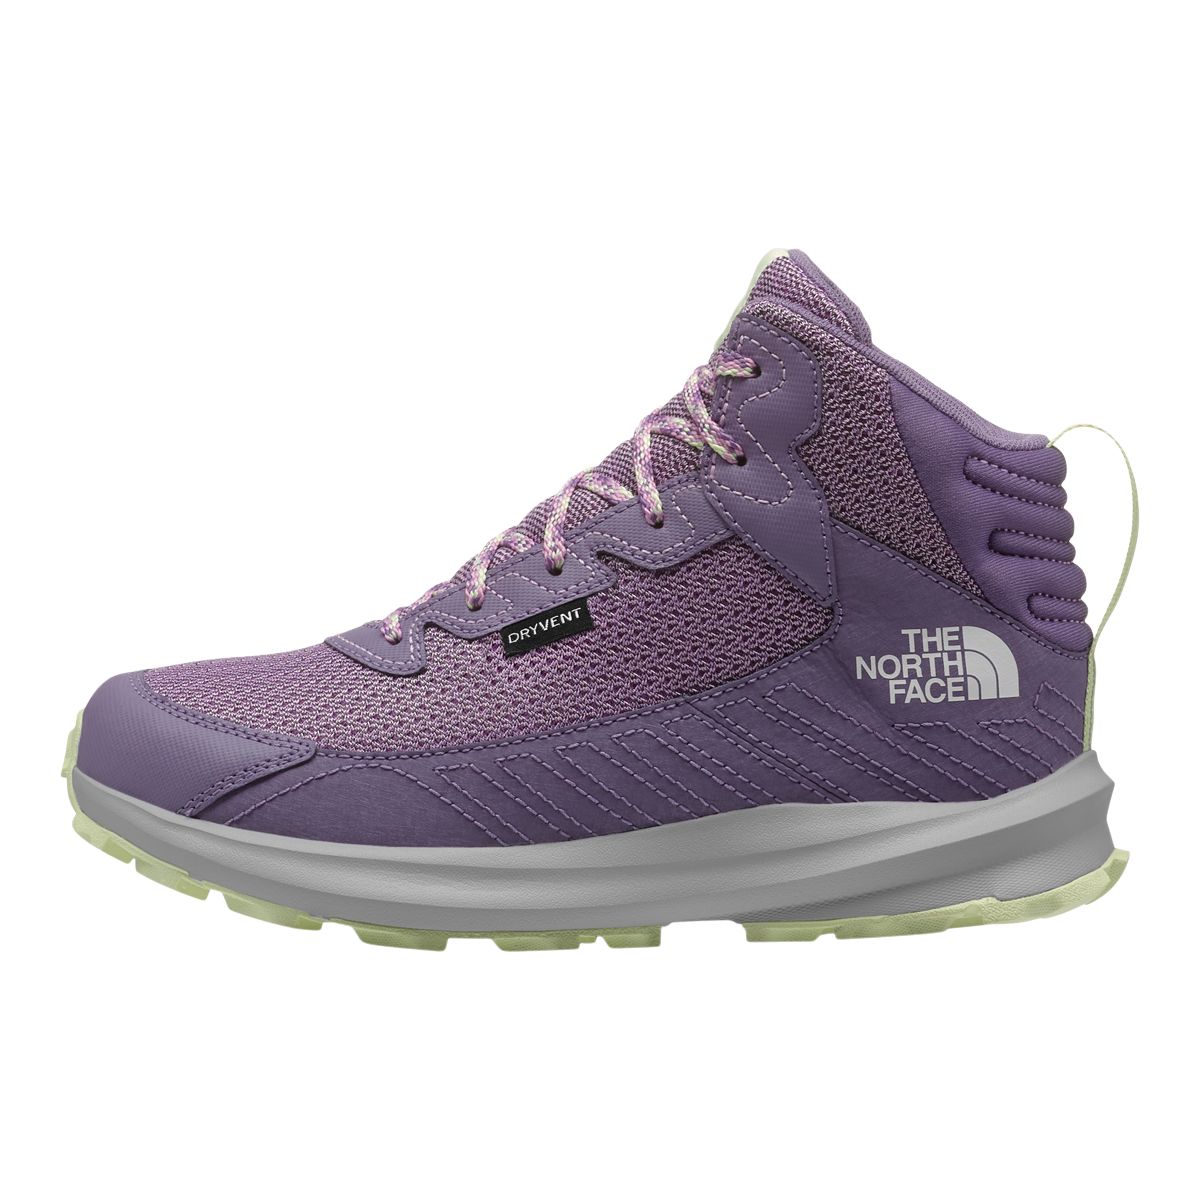 The North Face Girls' Grade/Pre-School Fastpack Waterproof Hiking Shoes